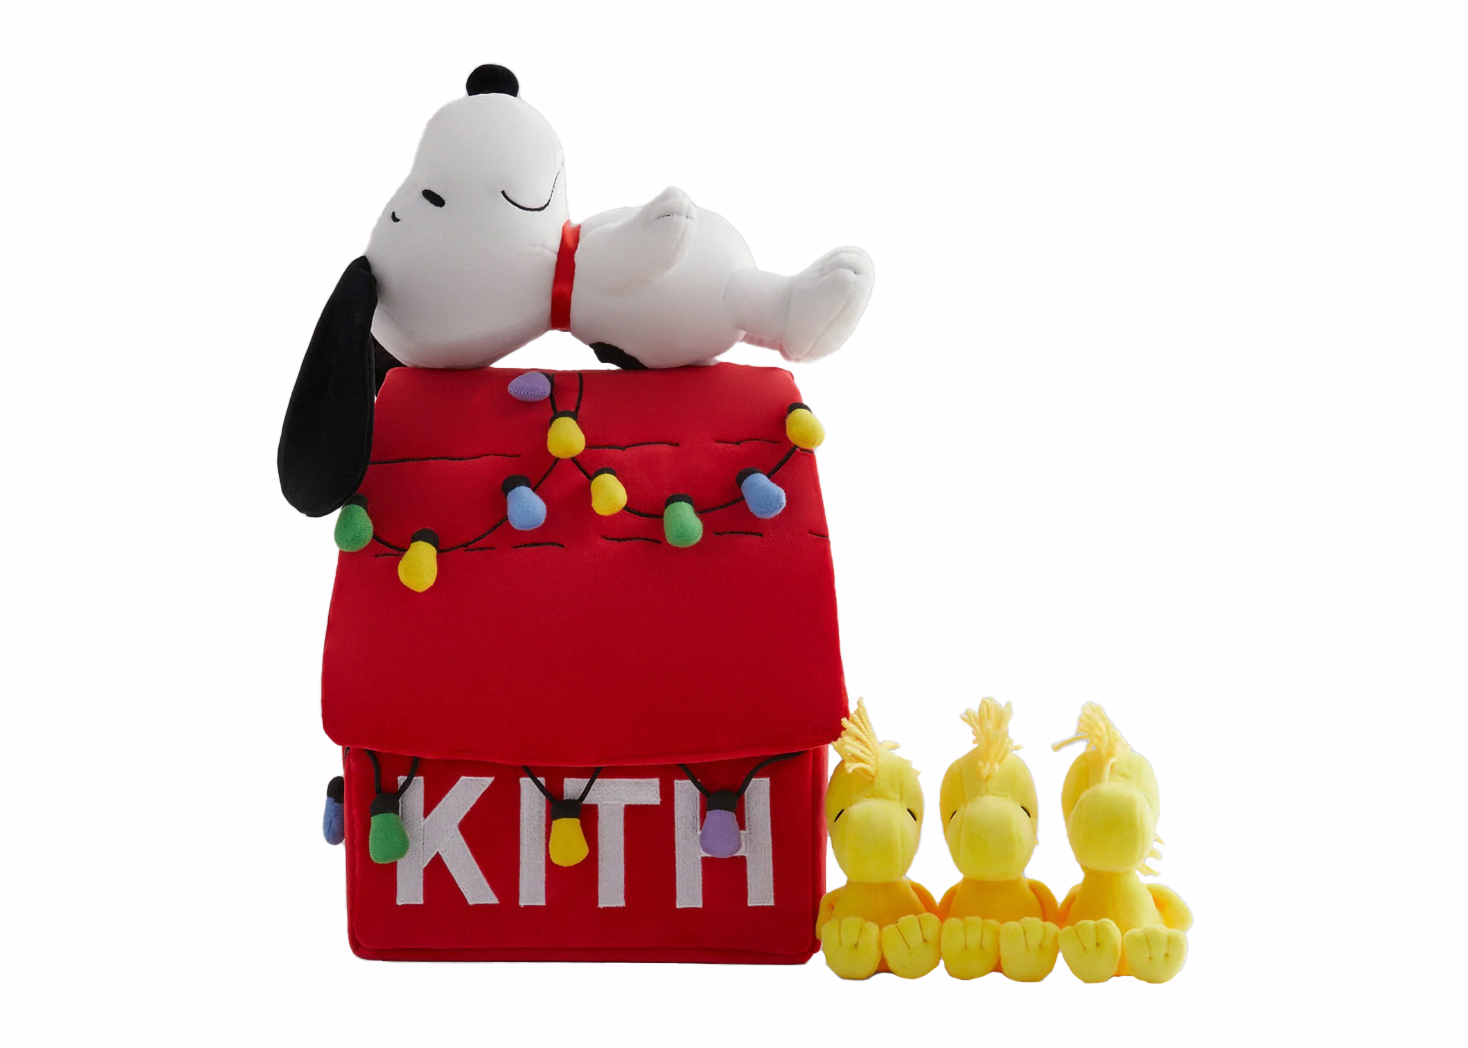 HoodieXXL Kith for Peanuts Doghouse Hoodie